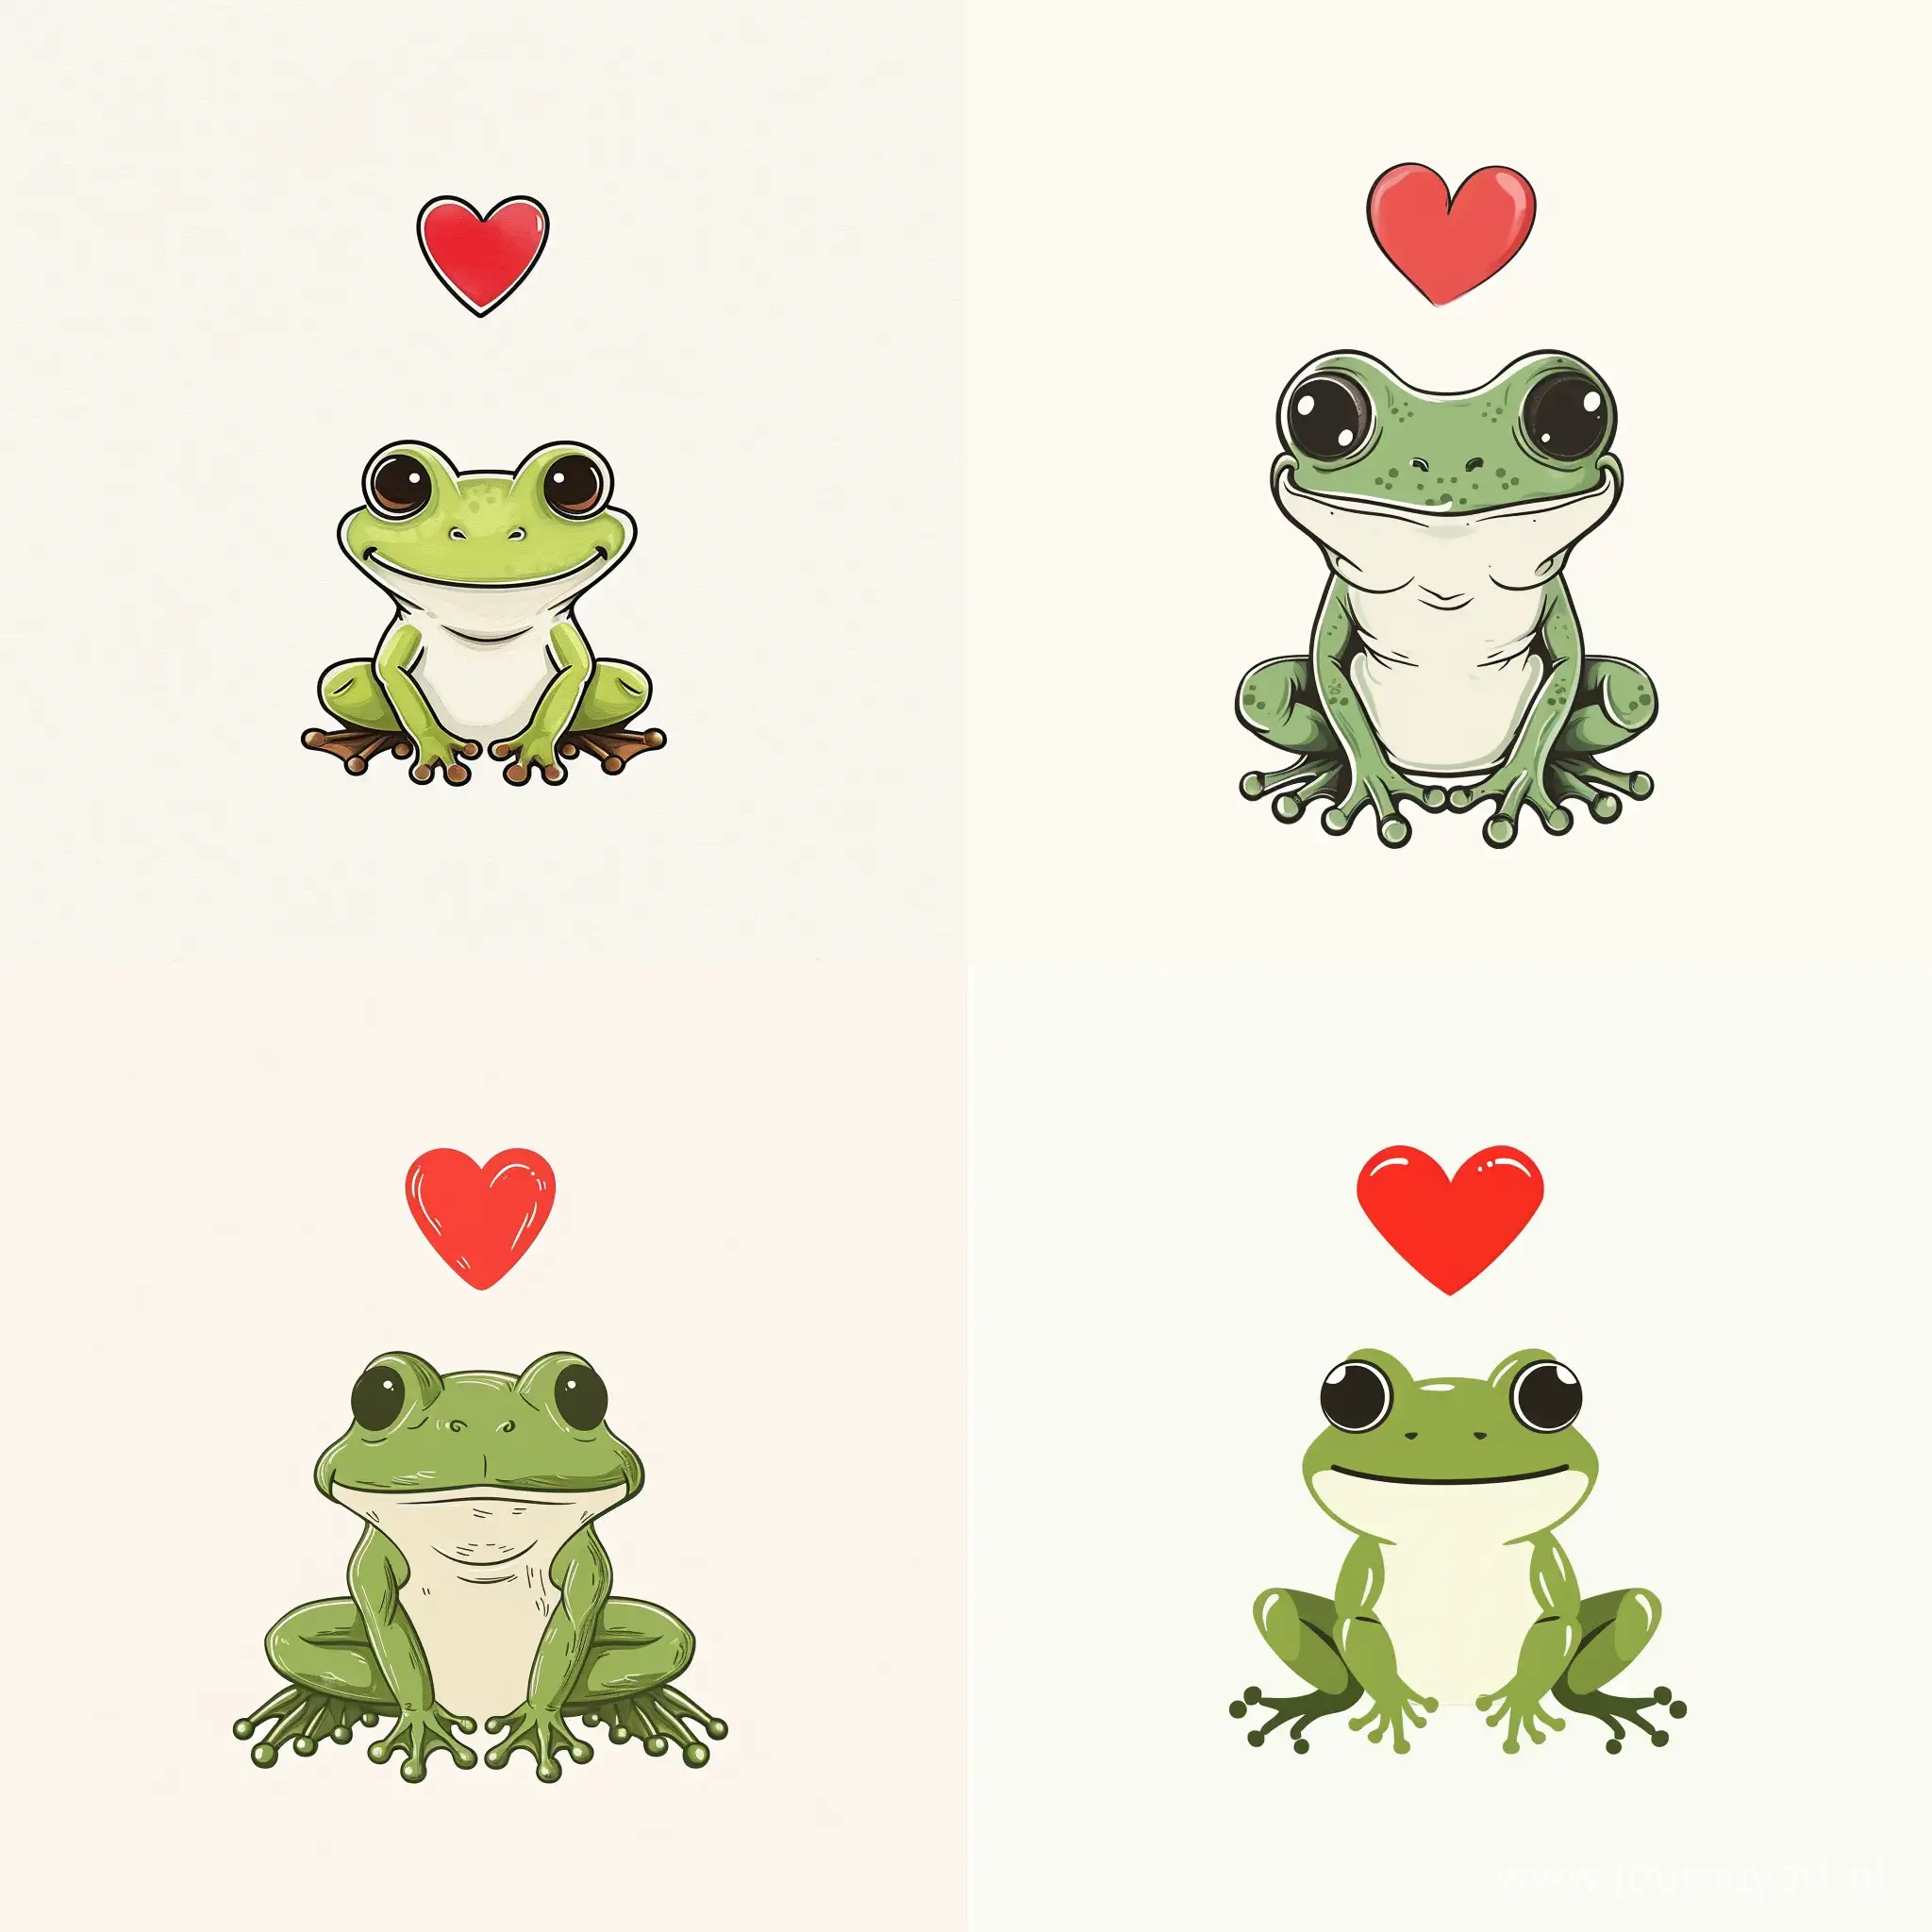 Adorable-Cartoon-Green-Frog-with-Heart-on-White-Background